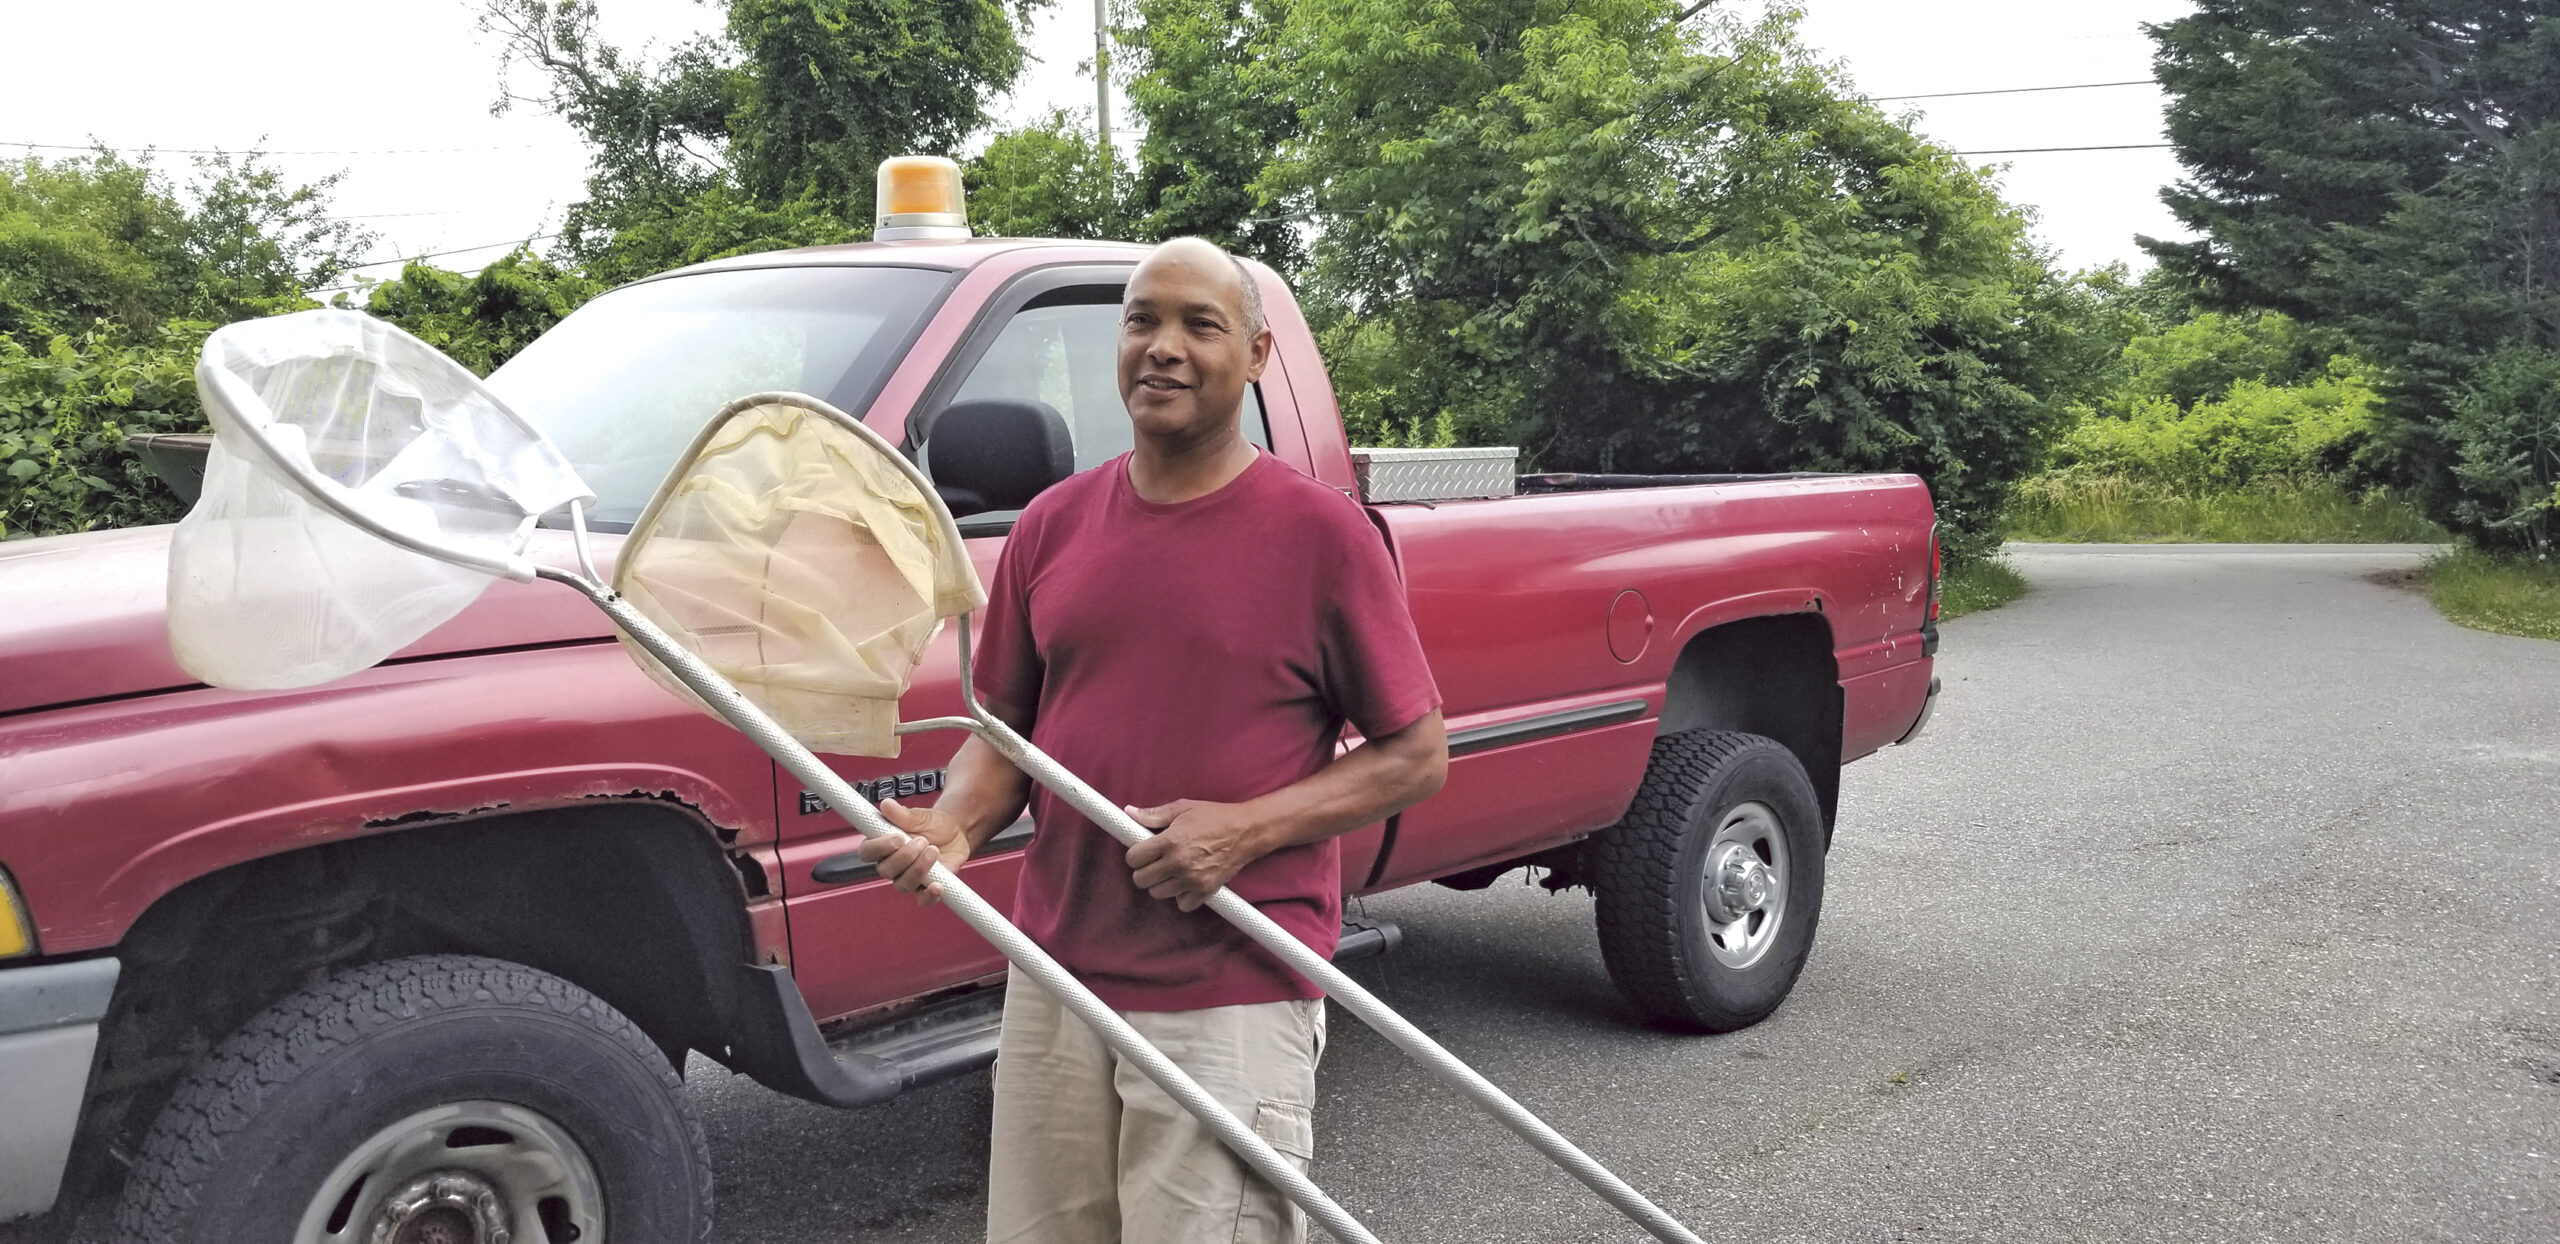 Taobi Silva is one of three Shinnecock who sued the New York State Department of Envioronmental Conservation and three of its officers over their right to fish.